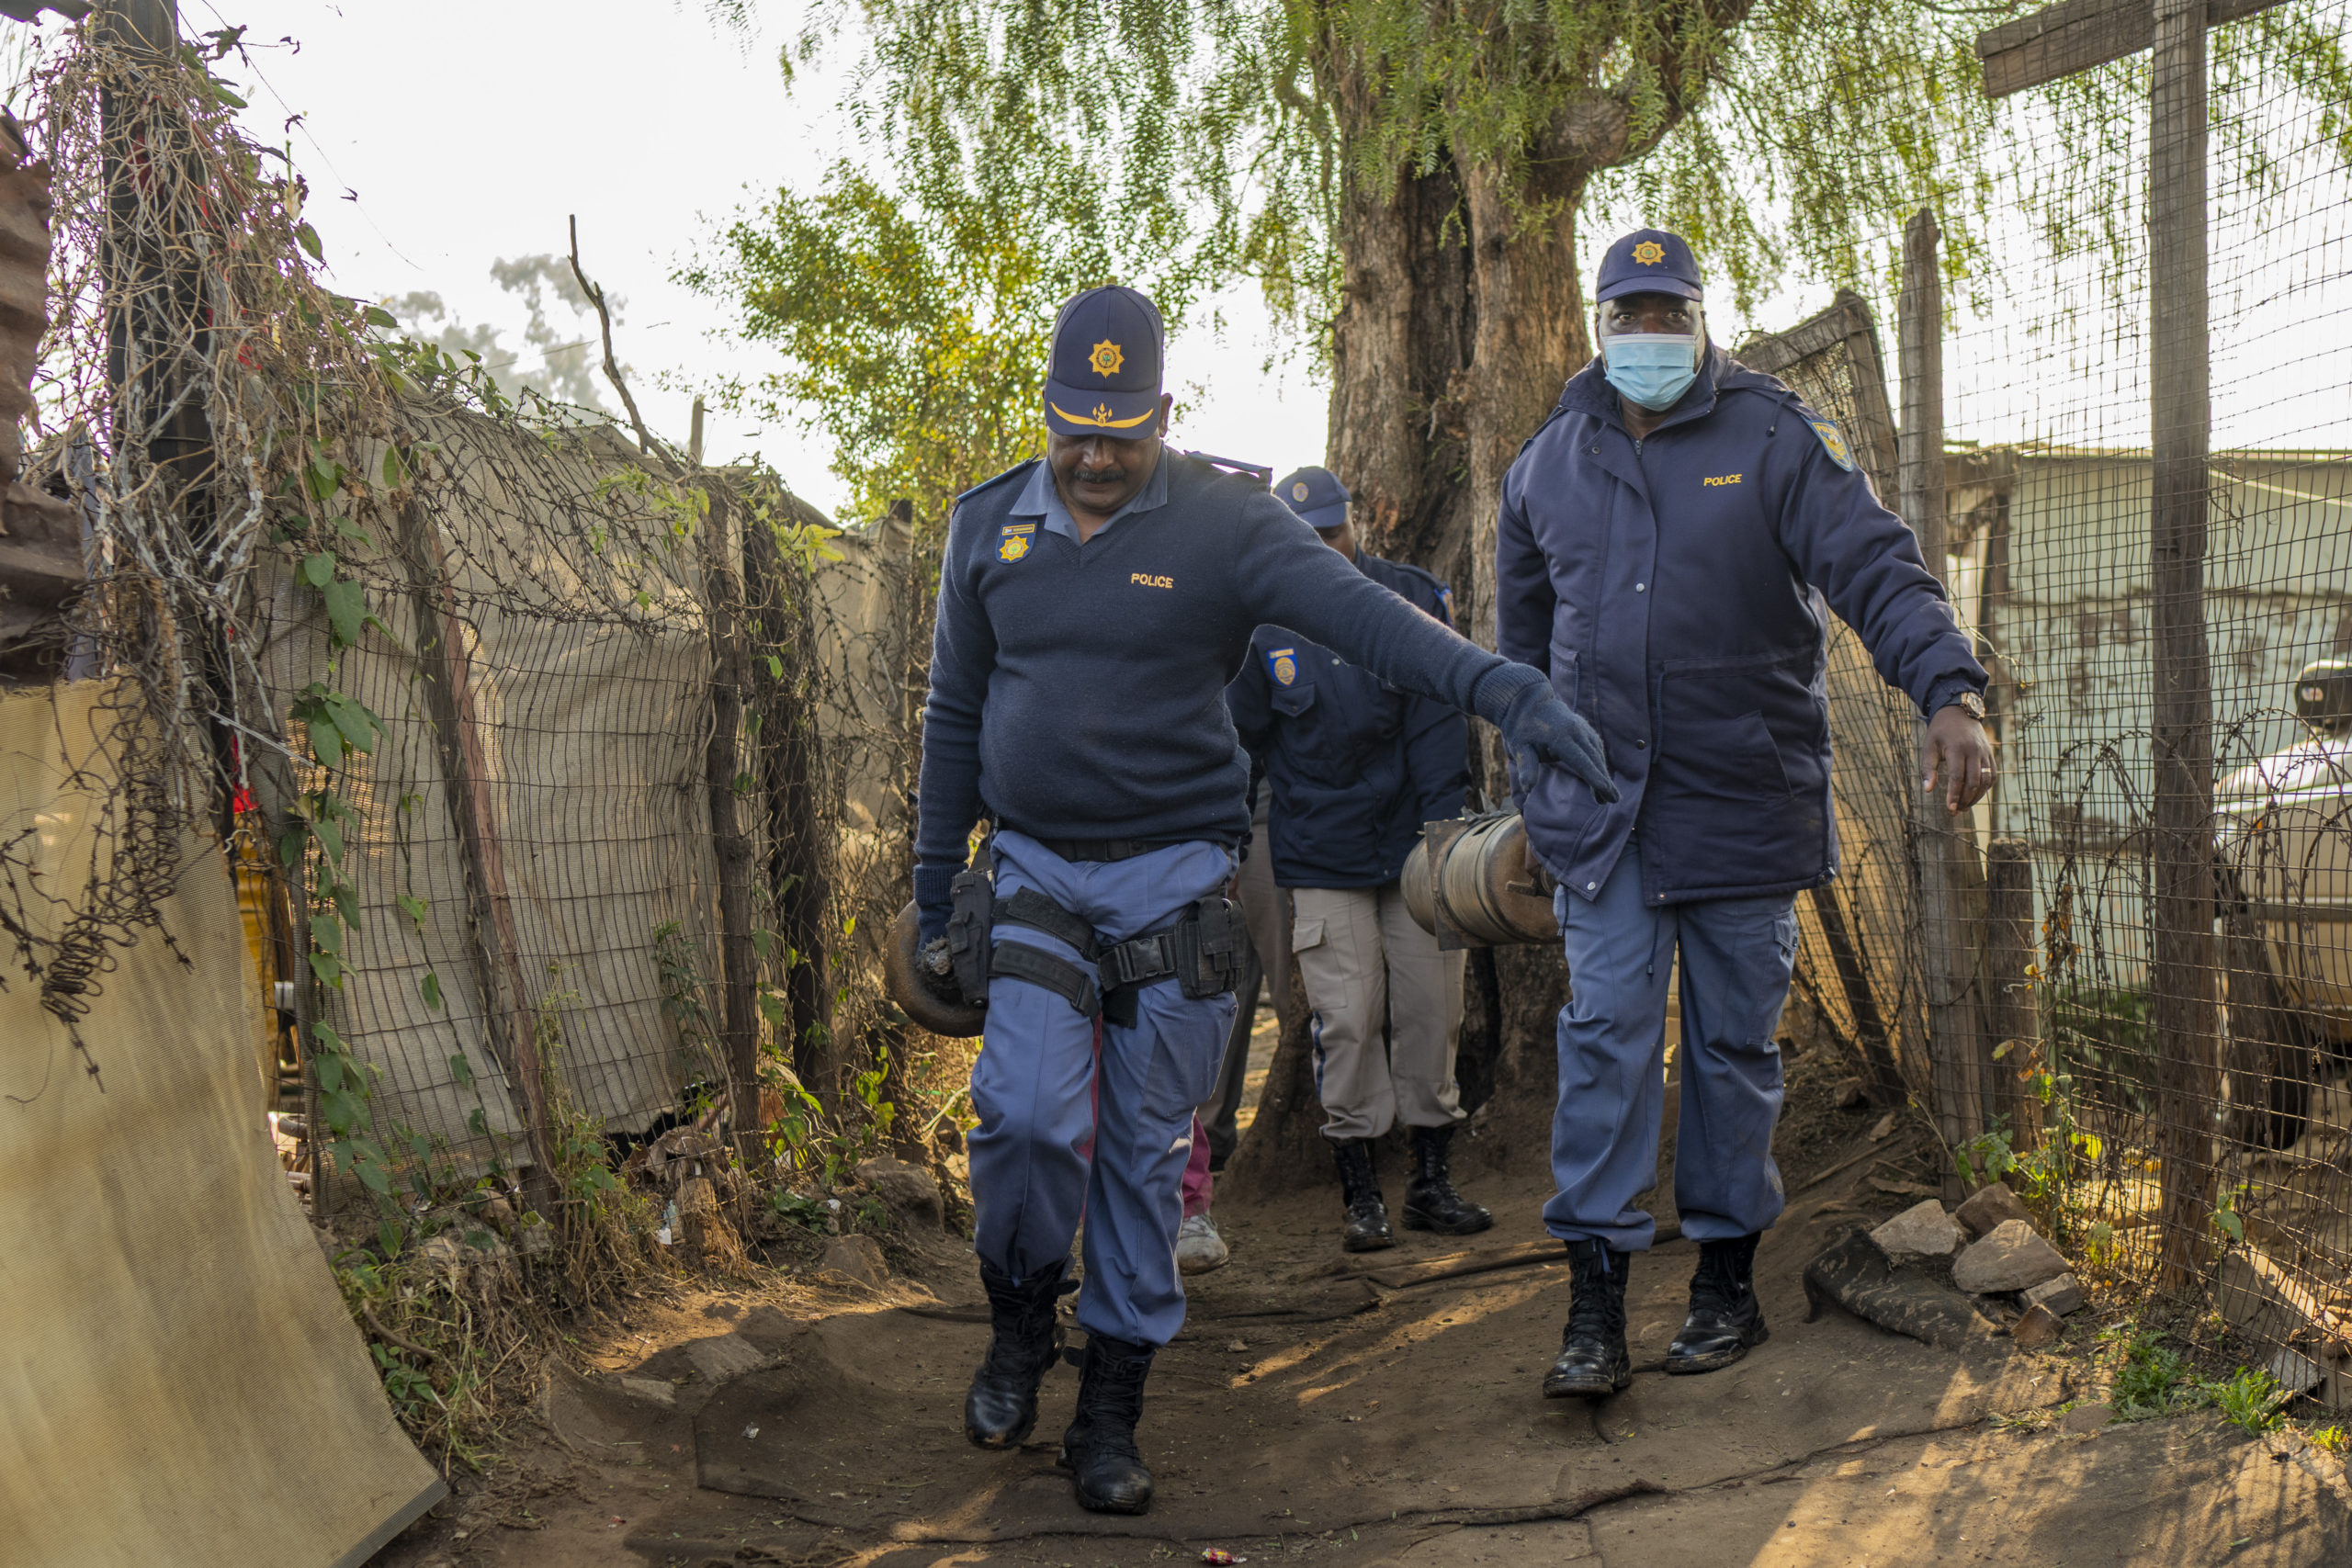 South African police officers remove gas cylinders used by illegal gold miners in the Angelo Informal Settlement in Boksburg, South Africa, Thursday. South African police said at least 17 people, including three children, have died from a leak of a toxic nitrate gas that was being used by illegal miners to process gold.